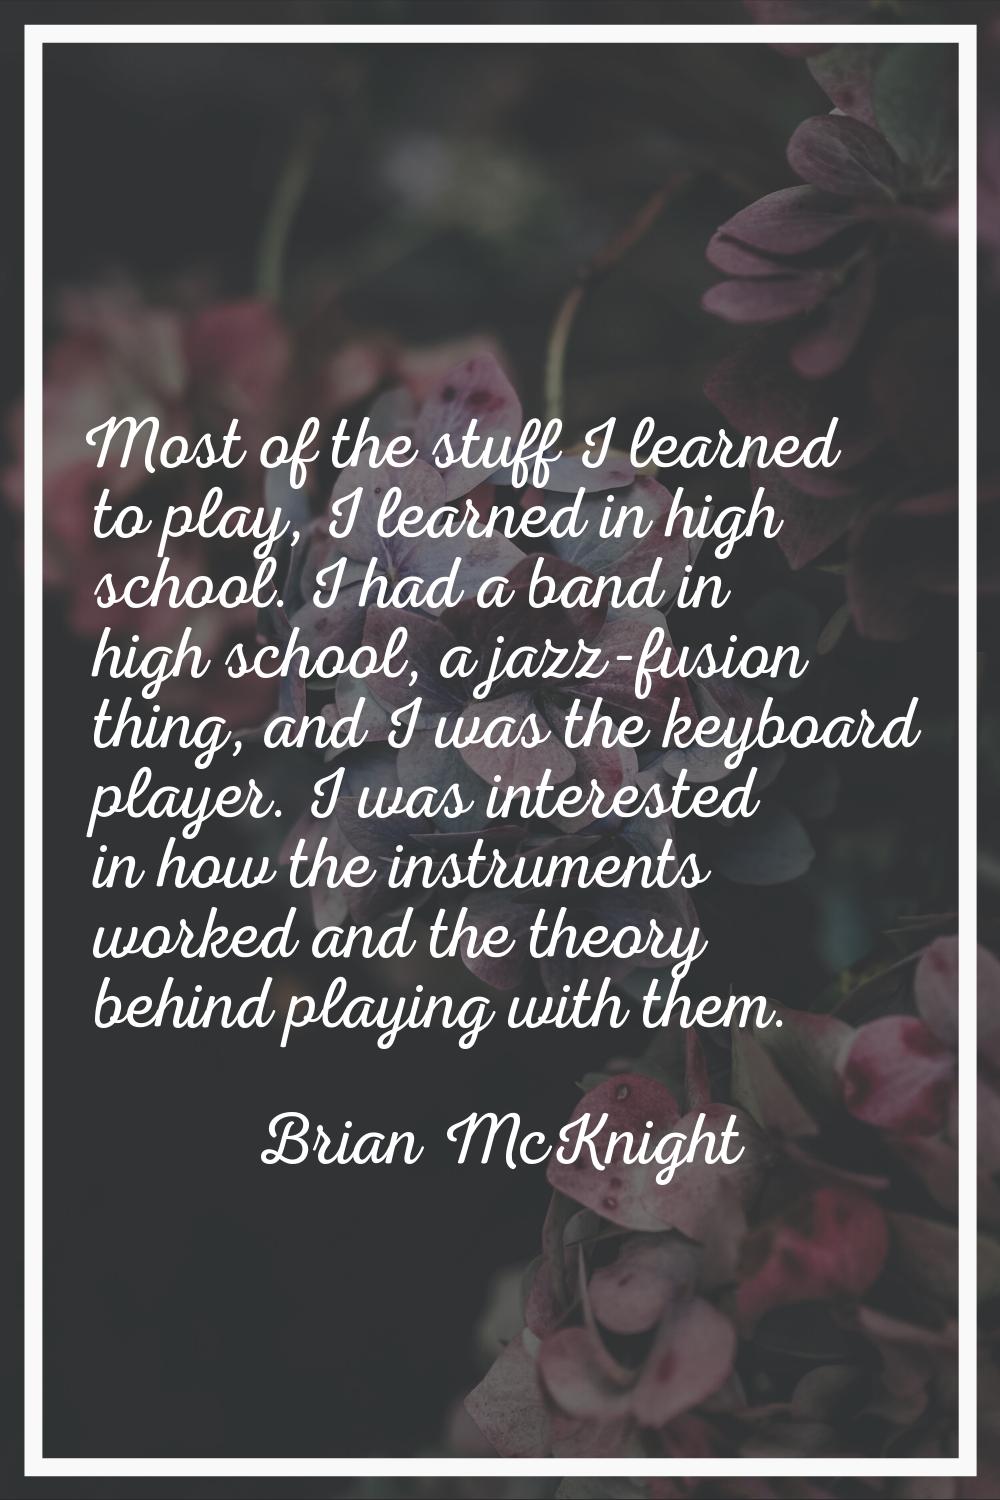 Most of the stuff I learned to play, I learned in high school. I had a band in high school, a jazz-